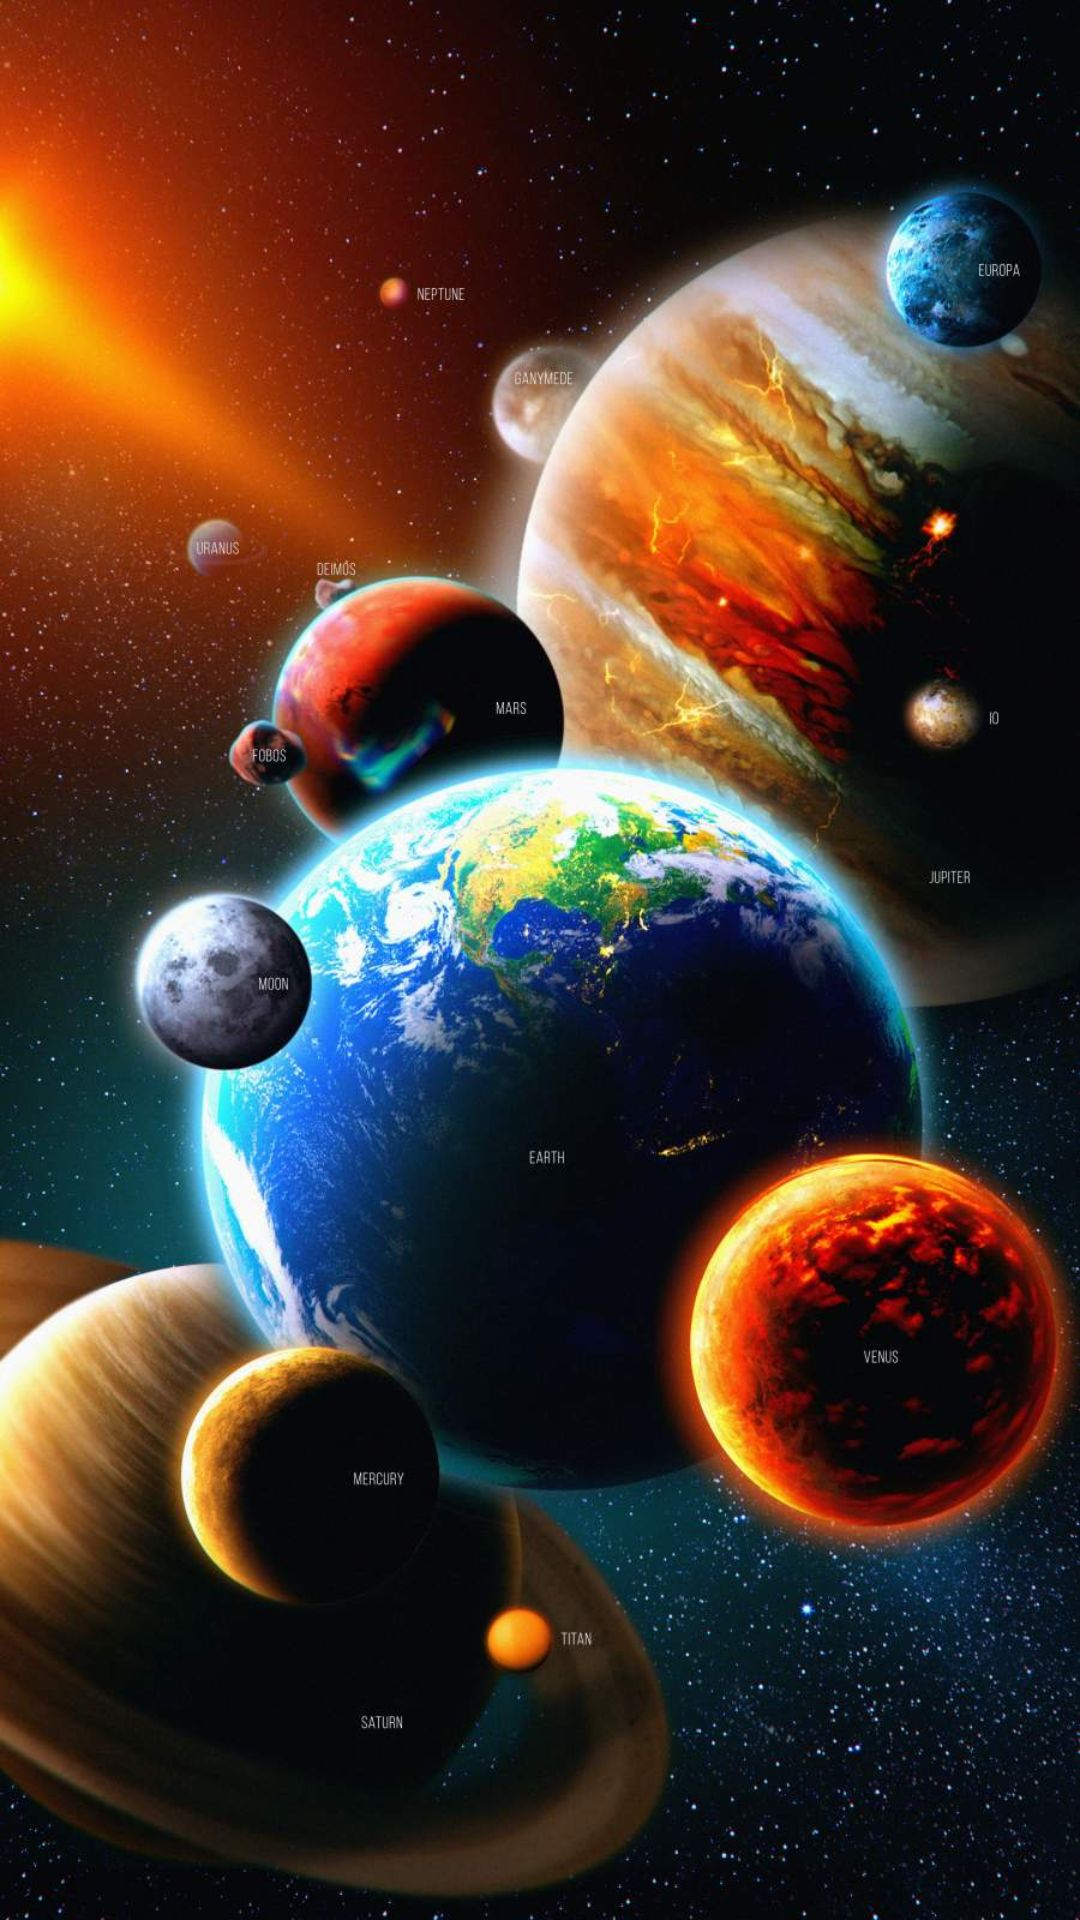 1080x1920 Planets Wallpapers Top 25 Best Planets Backgrounds Download